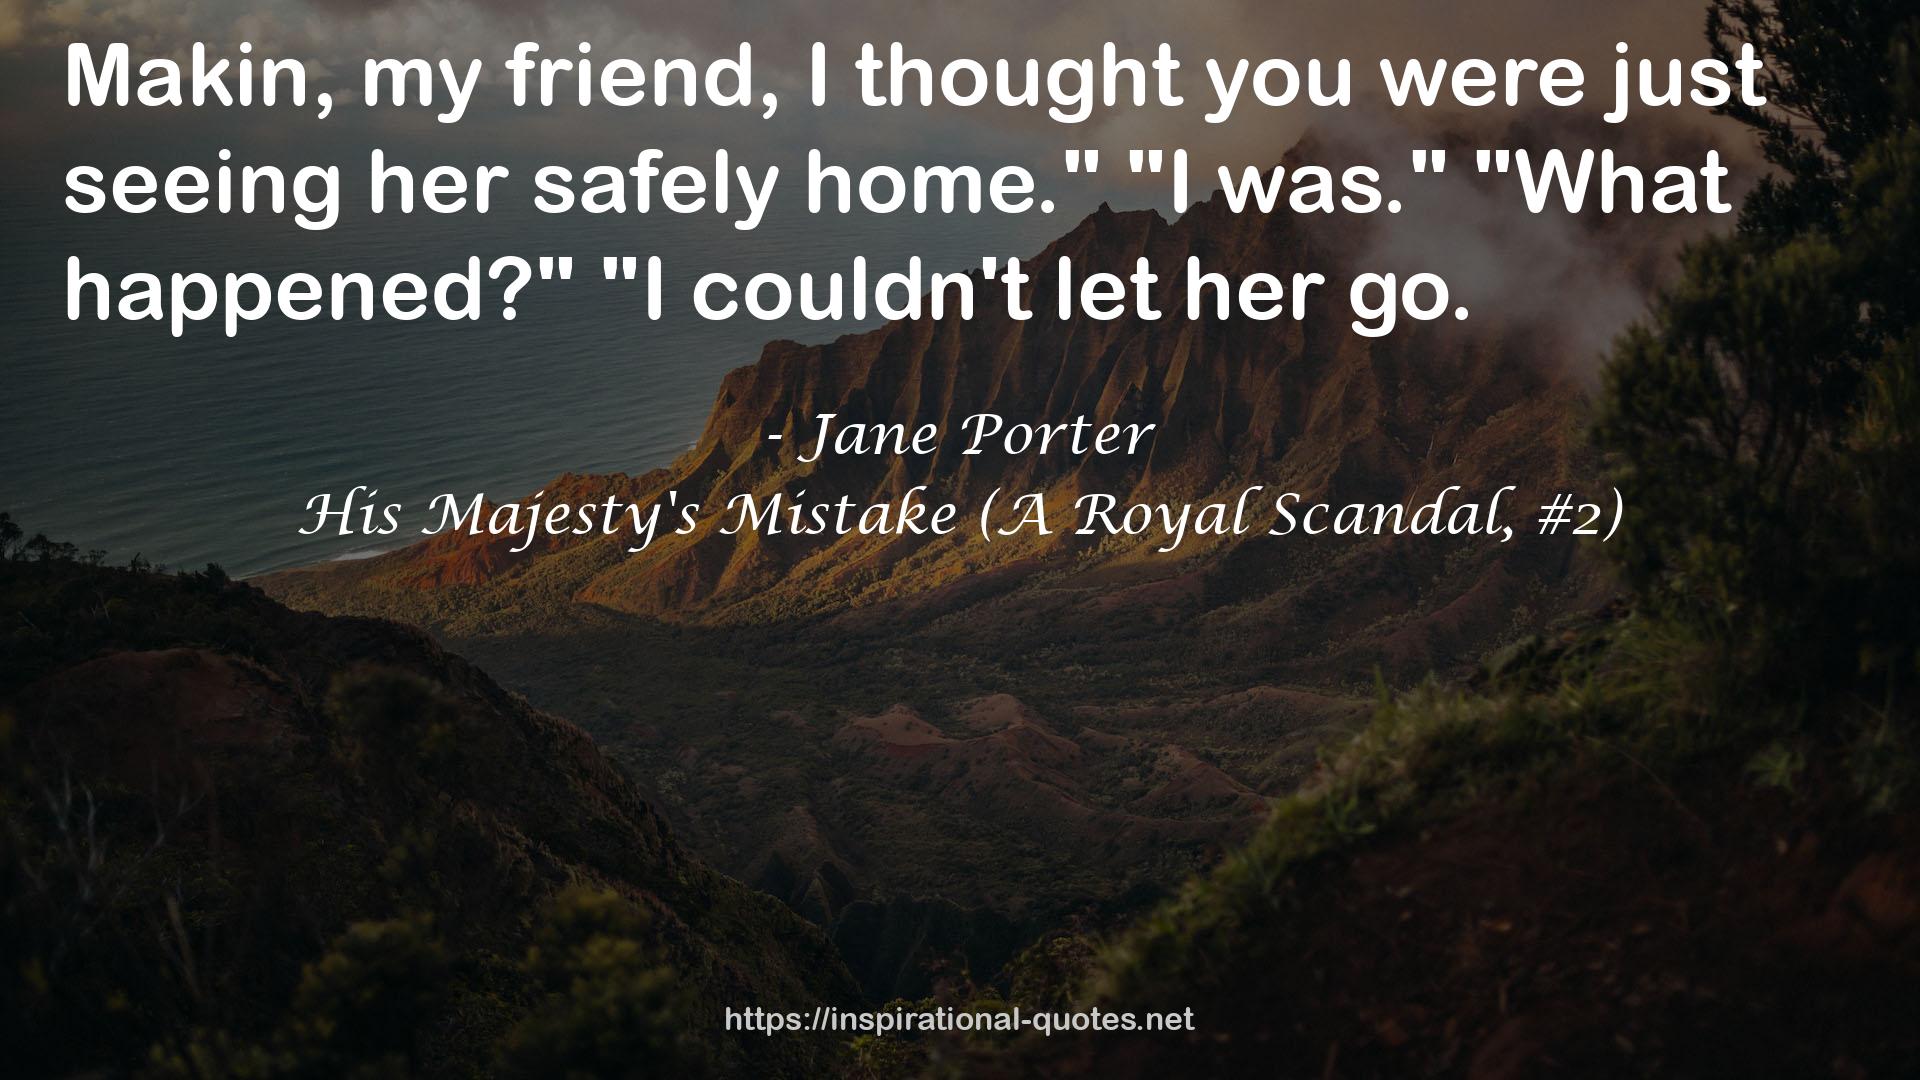 His Majesty's Mistake (A Royal Scandal, #2) QUOTES